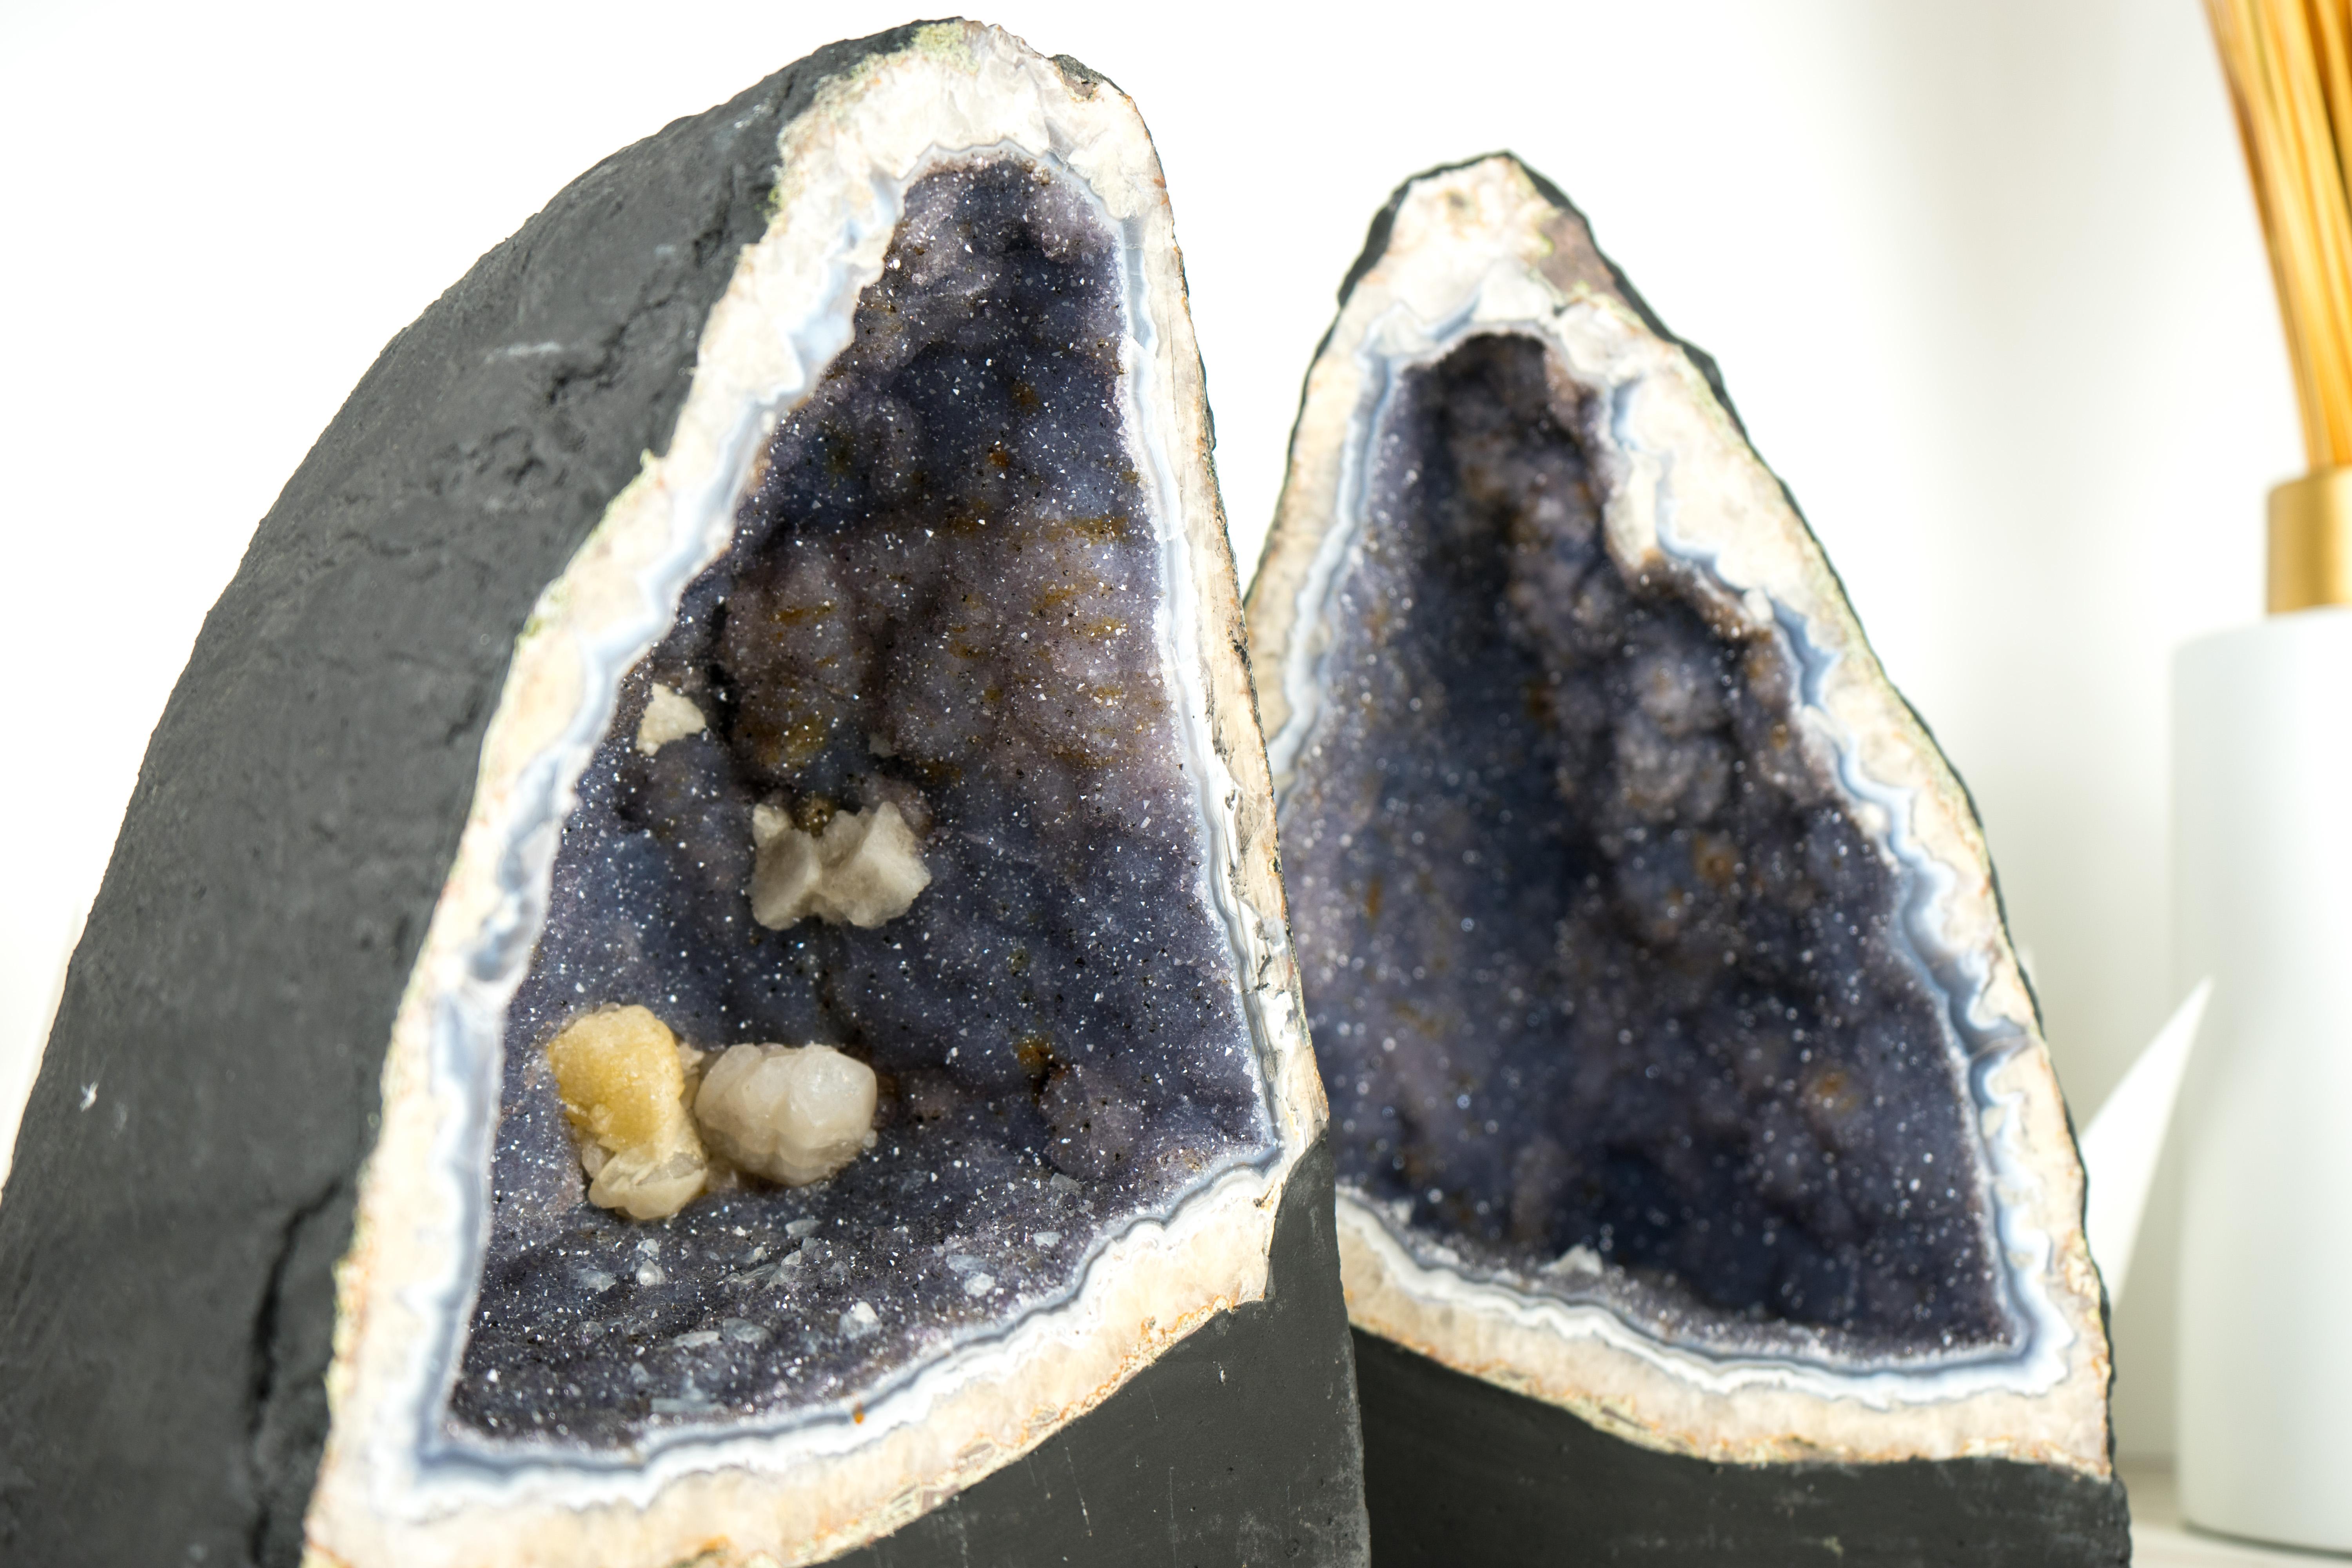 Pair of Blue Lace Agate Geodes with Lavender Amethyst Druzy, Rare Sparkly Geodes For Sale 6